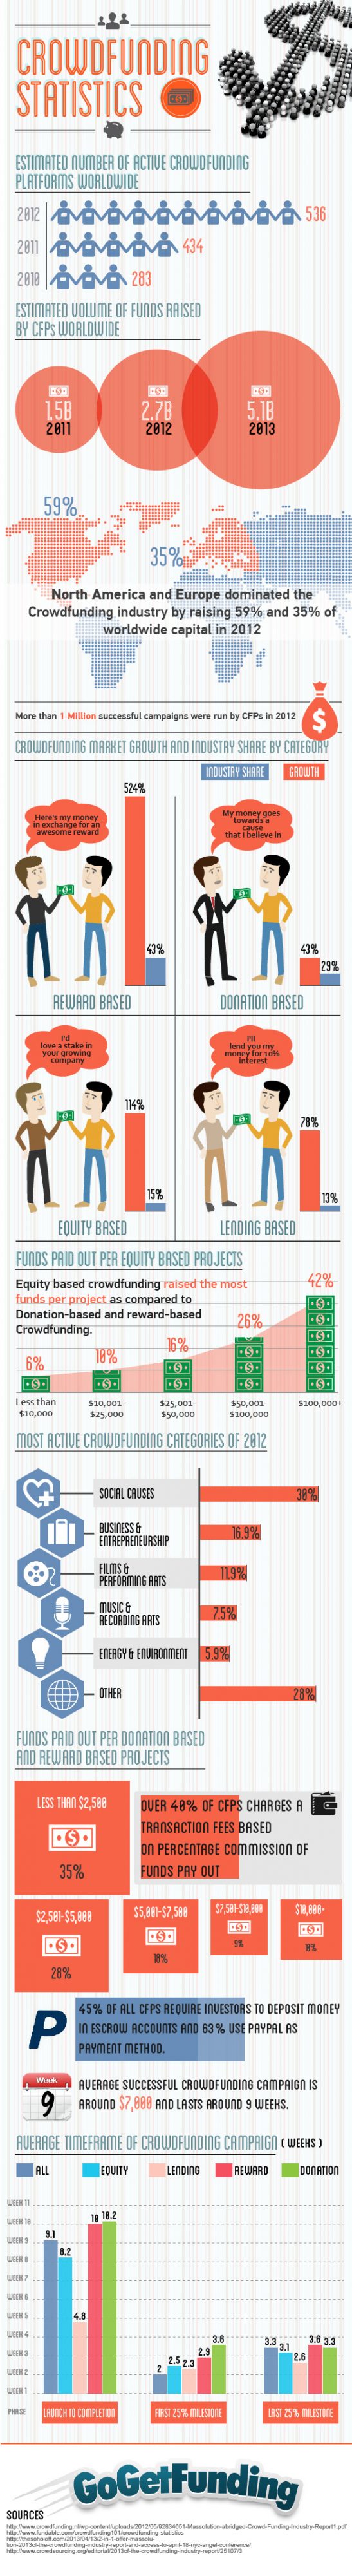 Crowdfunding Statistics and Trends Infographic